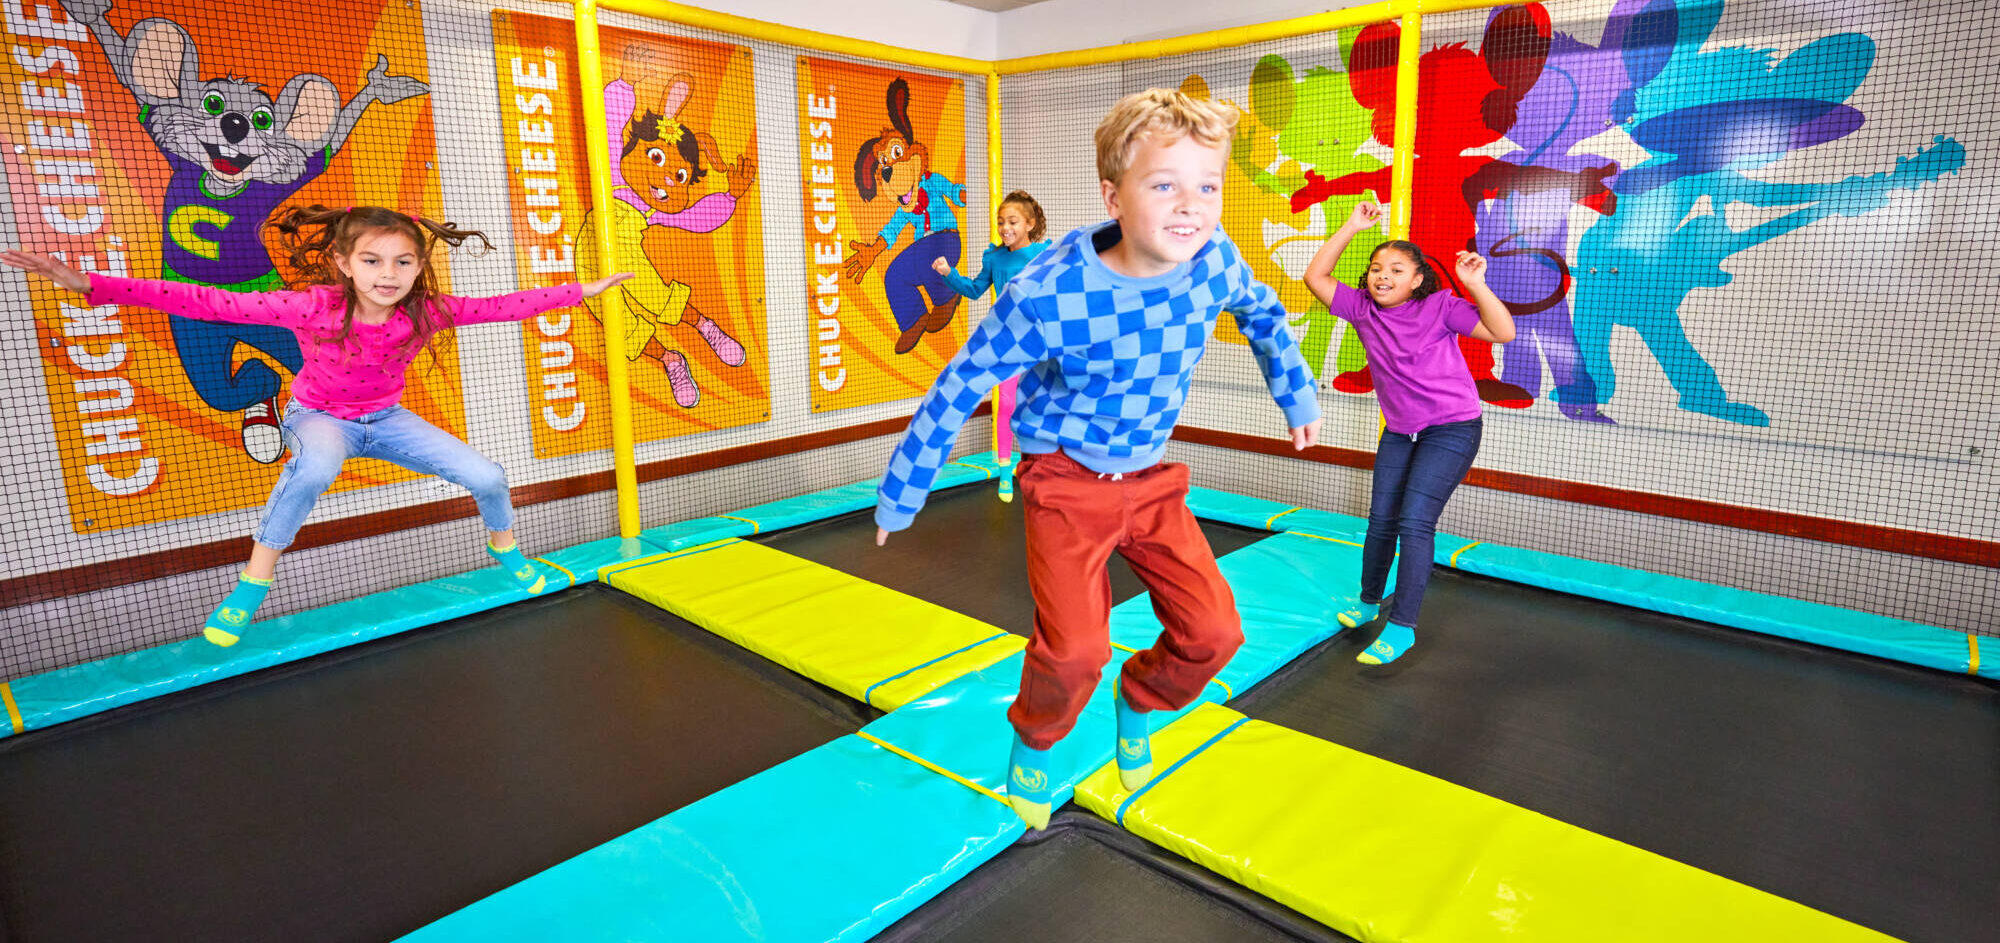 FREE All-Day Jump Pass at Chuck E. Cheese Trampoline Zone on February 29th